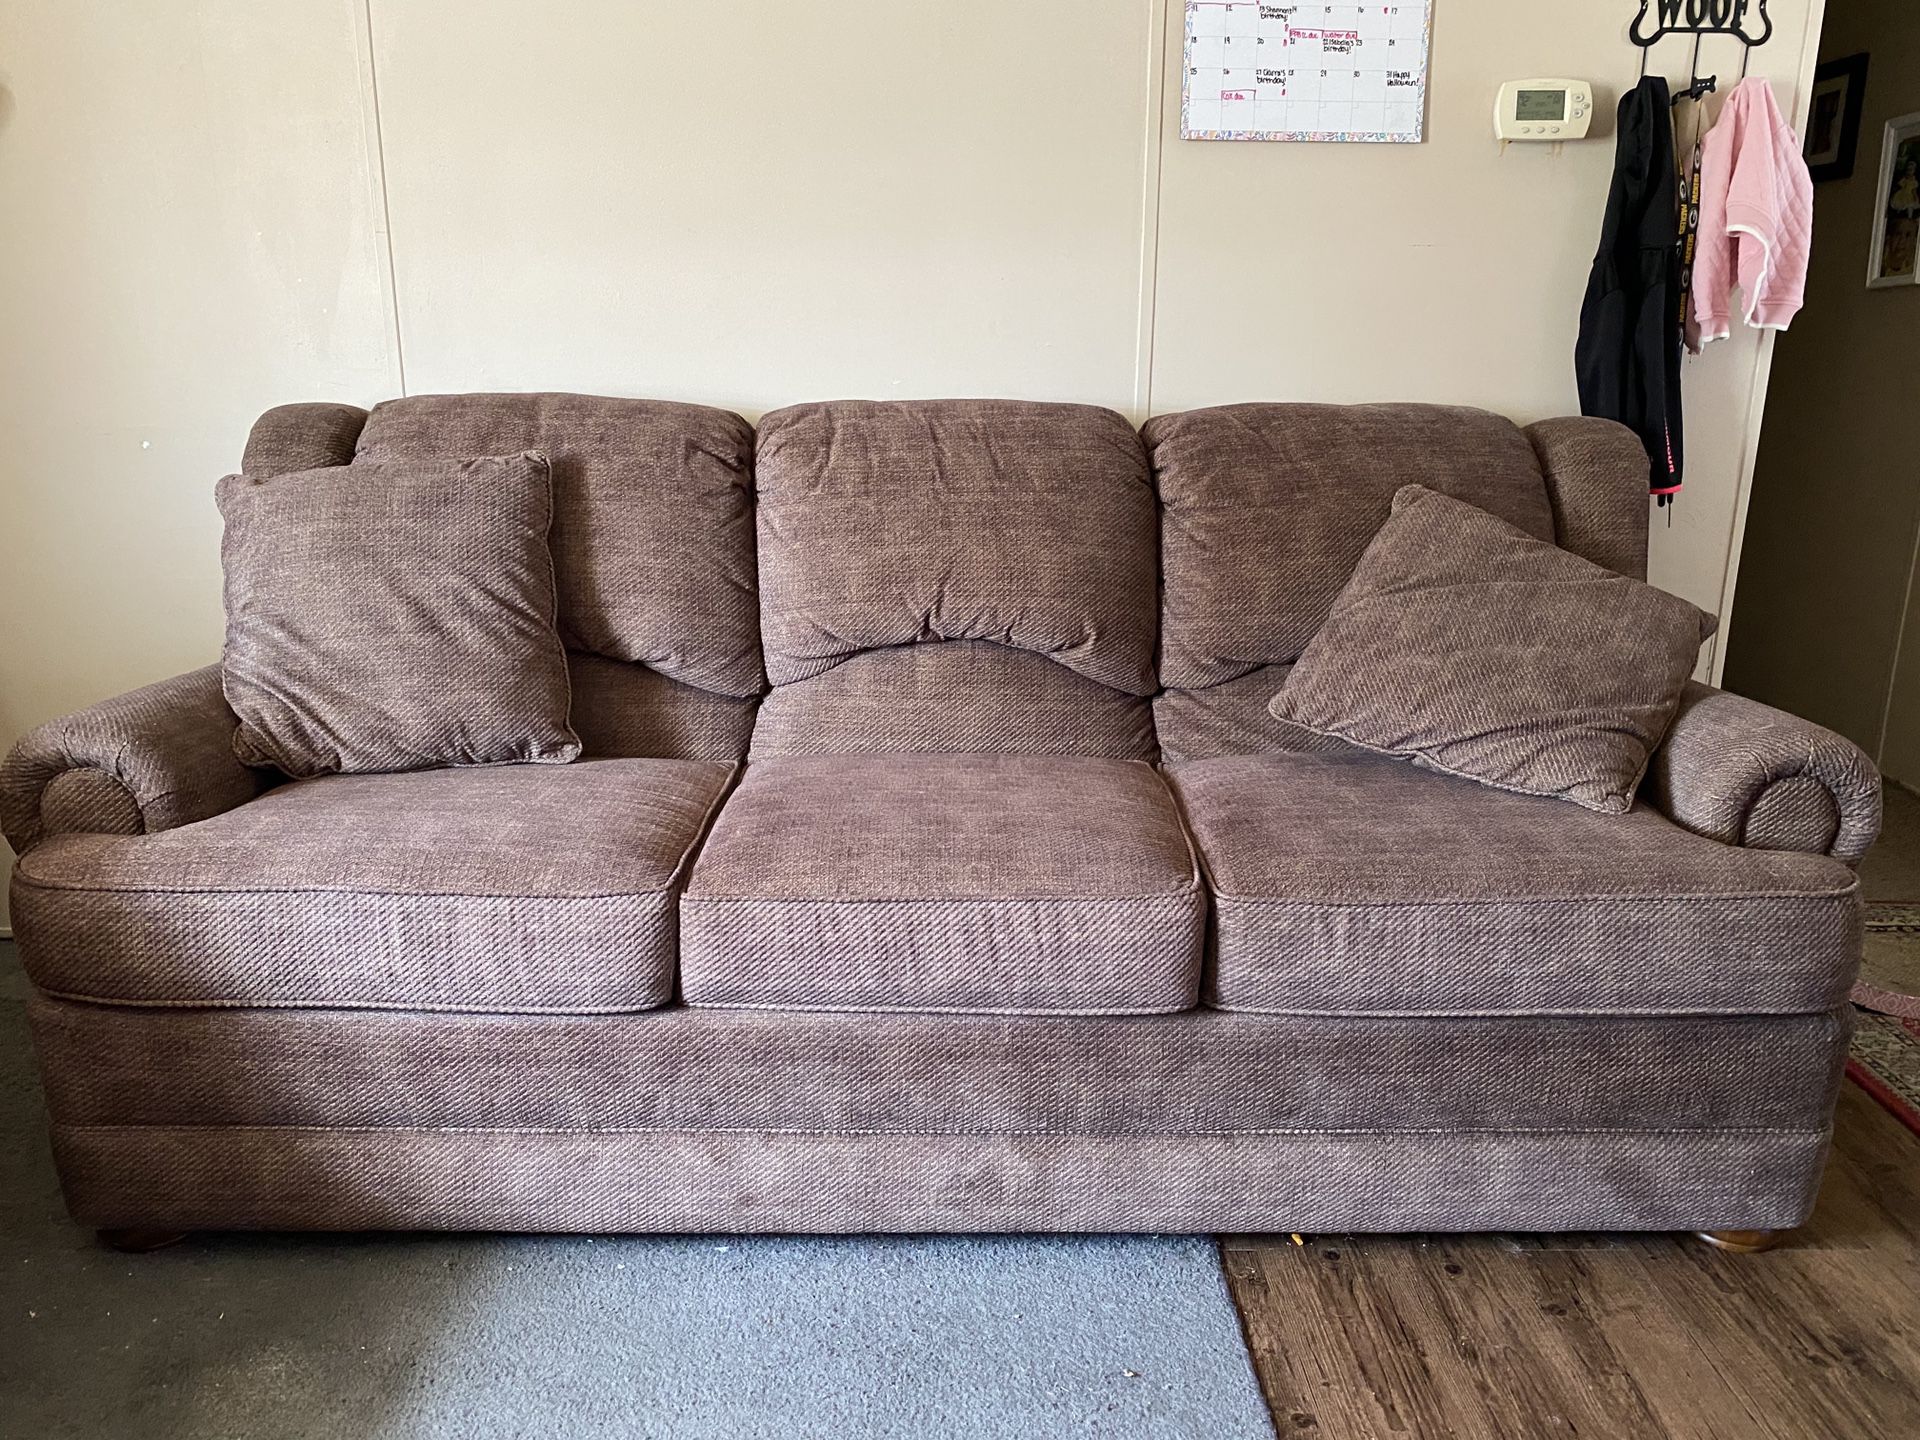 Brown couch $100 OBO